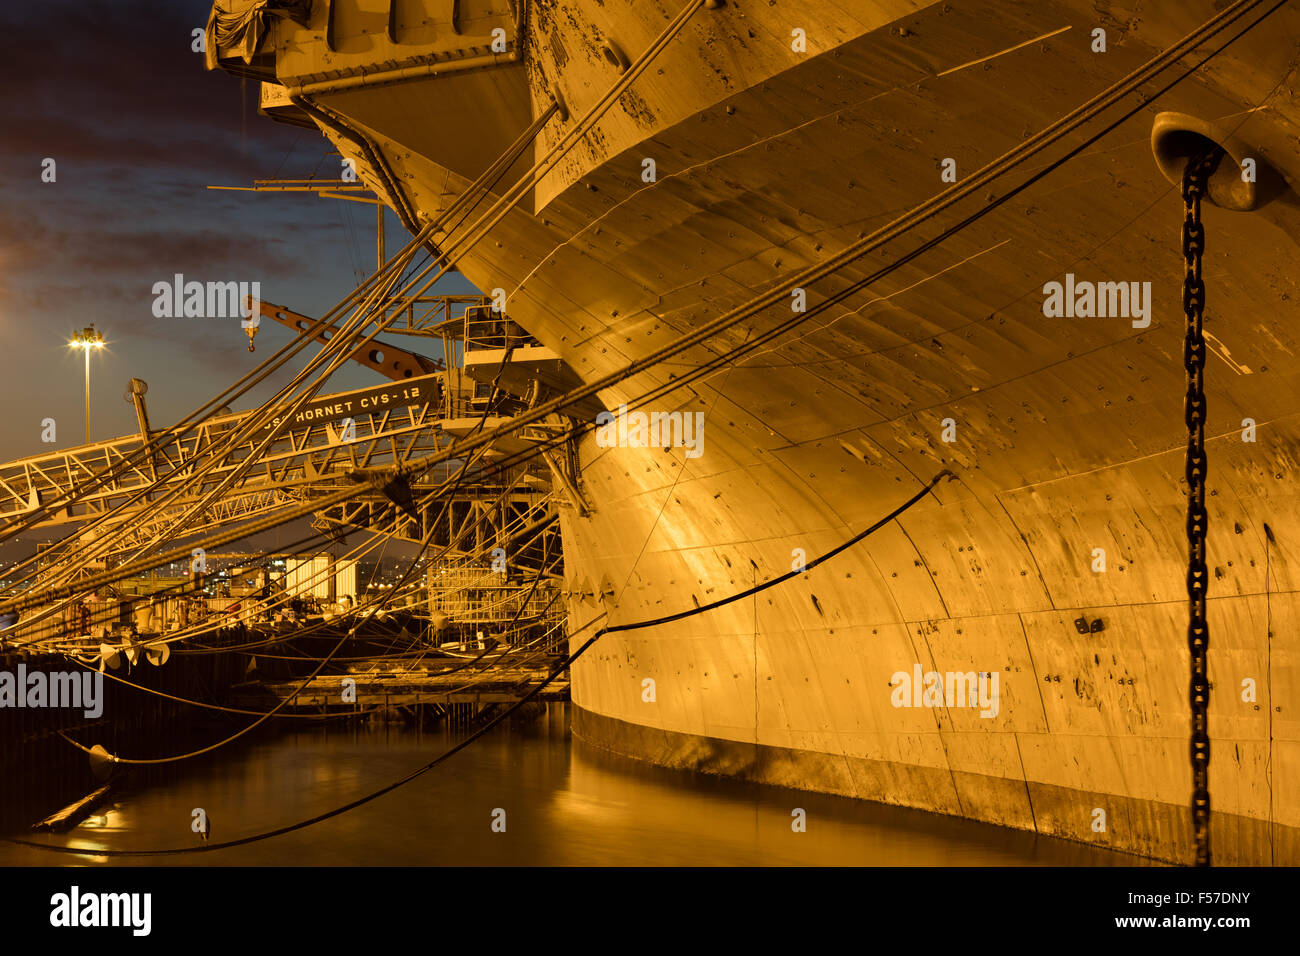 USS Hornet. Historic Navy aircraft carrier, docked in Alameda, CA. Stock Photo